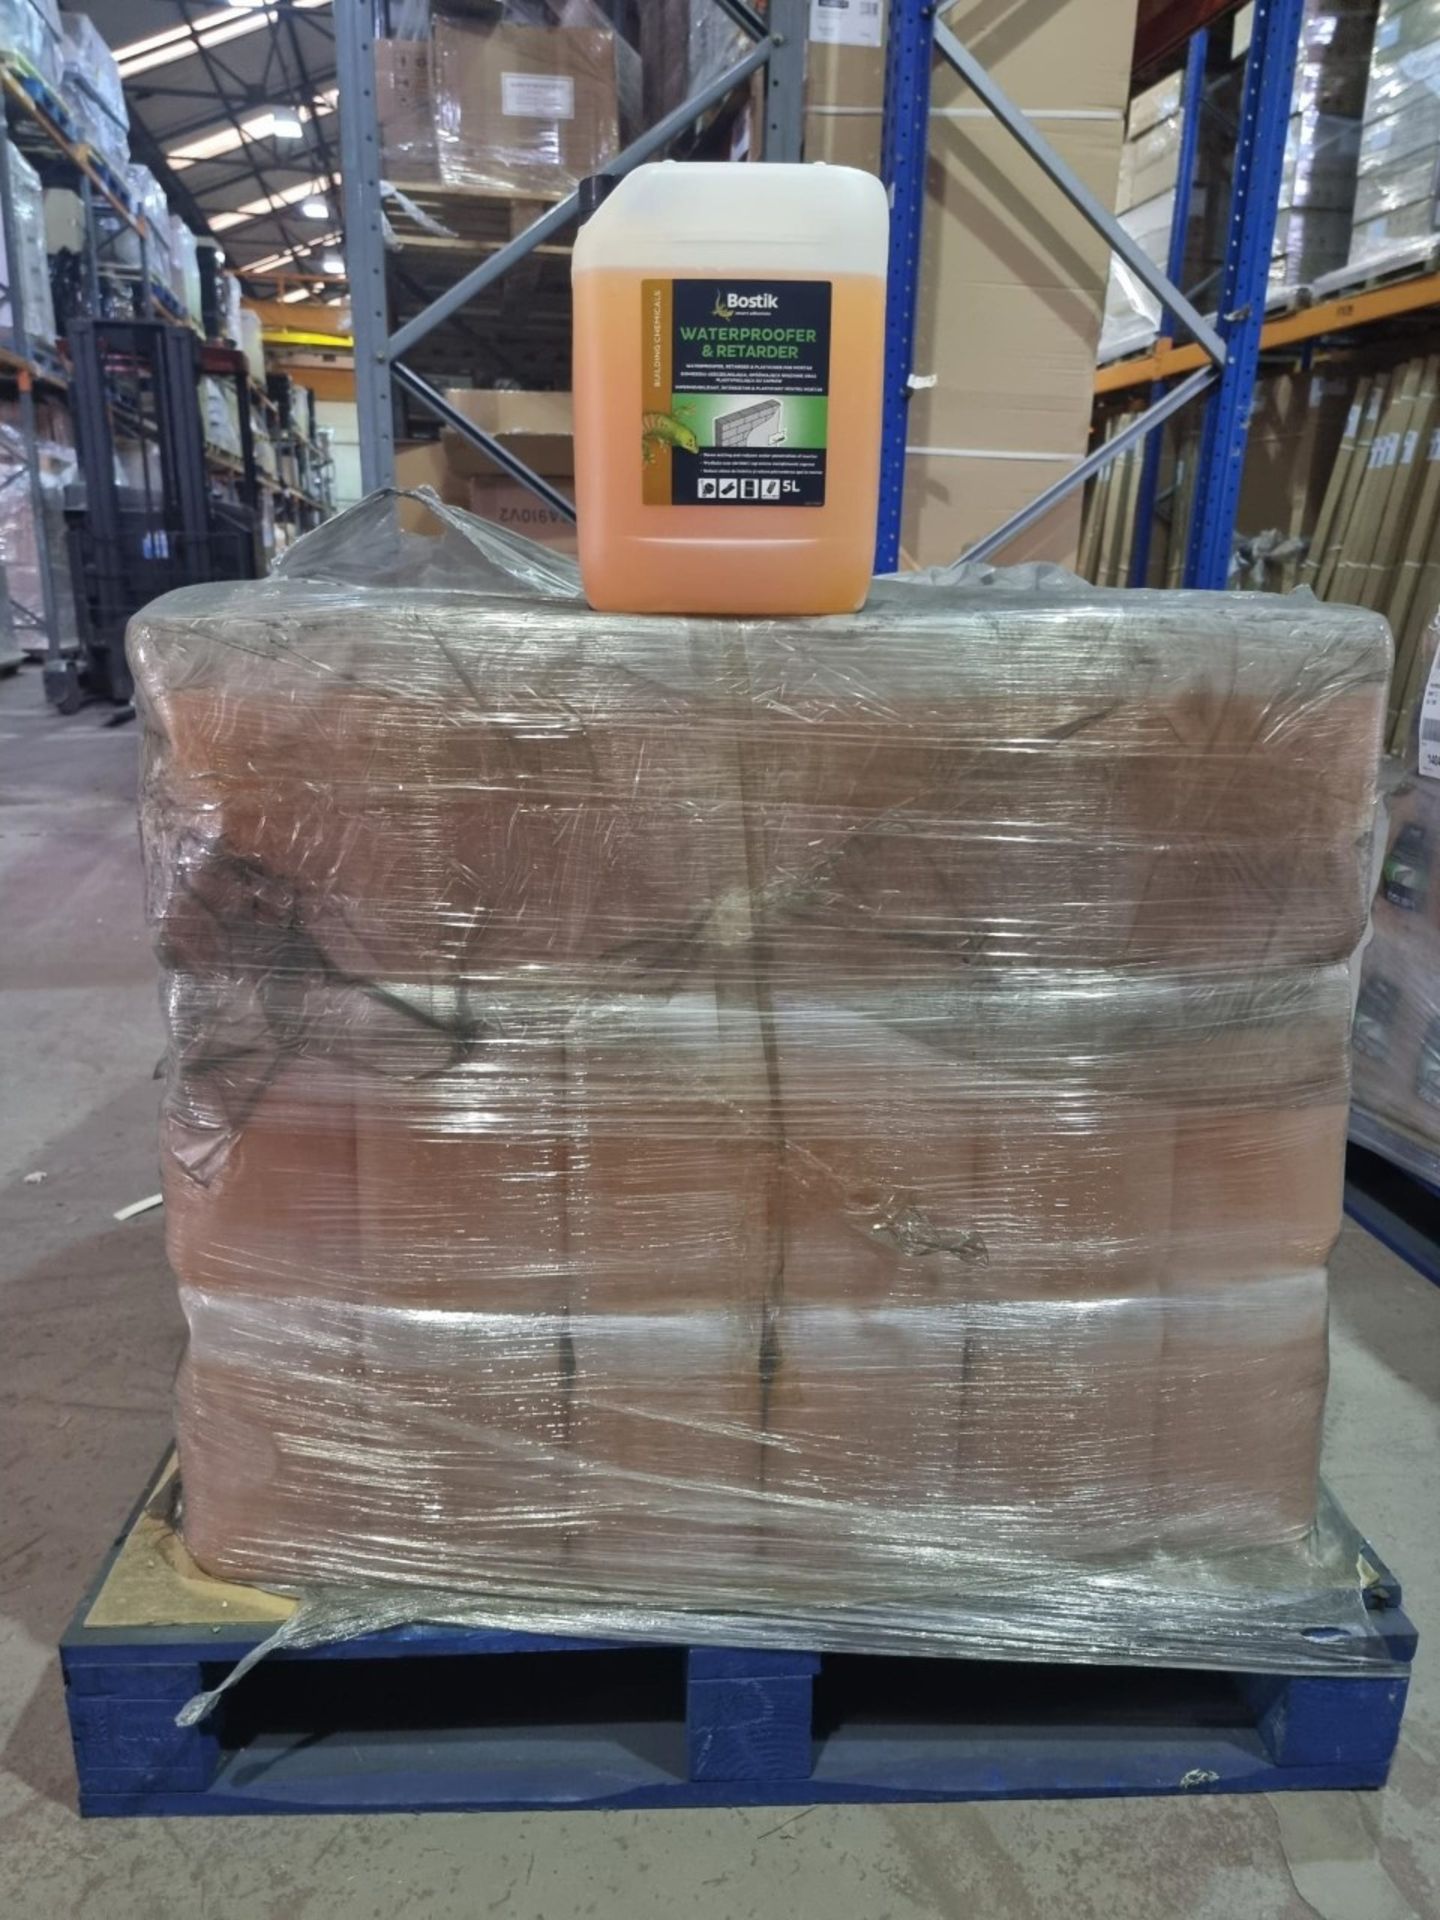 PALLET TO CONTAIN 108 x 5L TUBS OF BOSTIK WATERPROOFER & RETARDER. RRP £22 PER TUB - Image 2 of 2